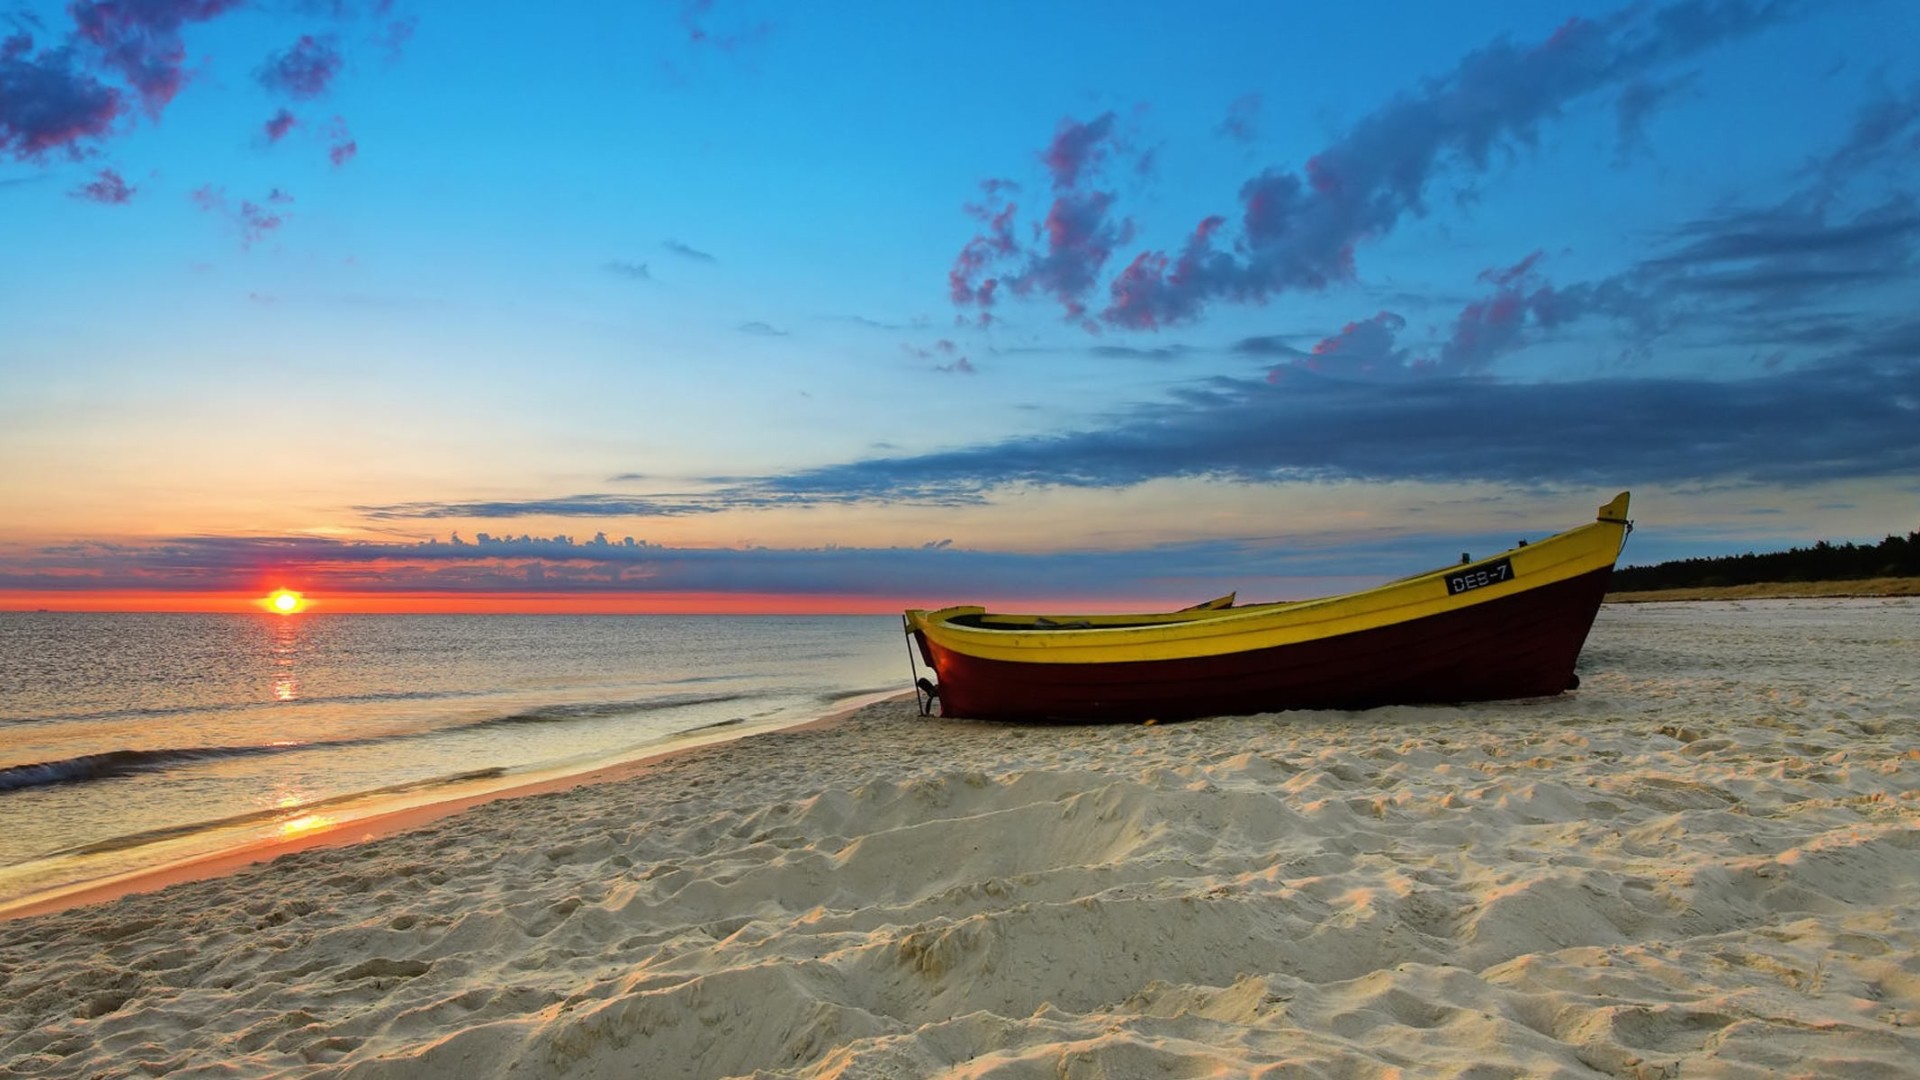 Relax Wallpapers Hd Wallpapers Pulse 1366ã768 Relax - Ocean Sunset Beach Boat - HD Wallpaper 